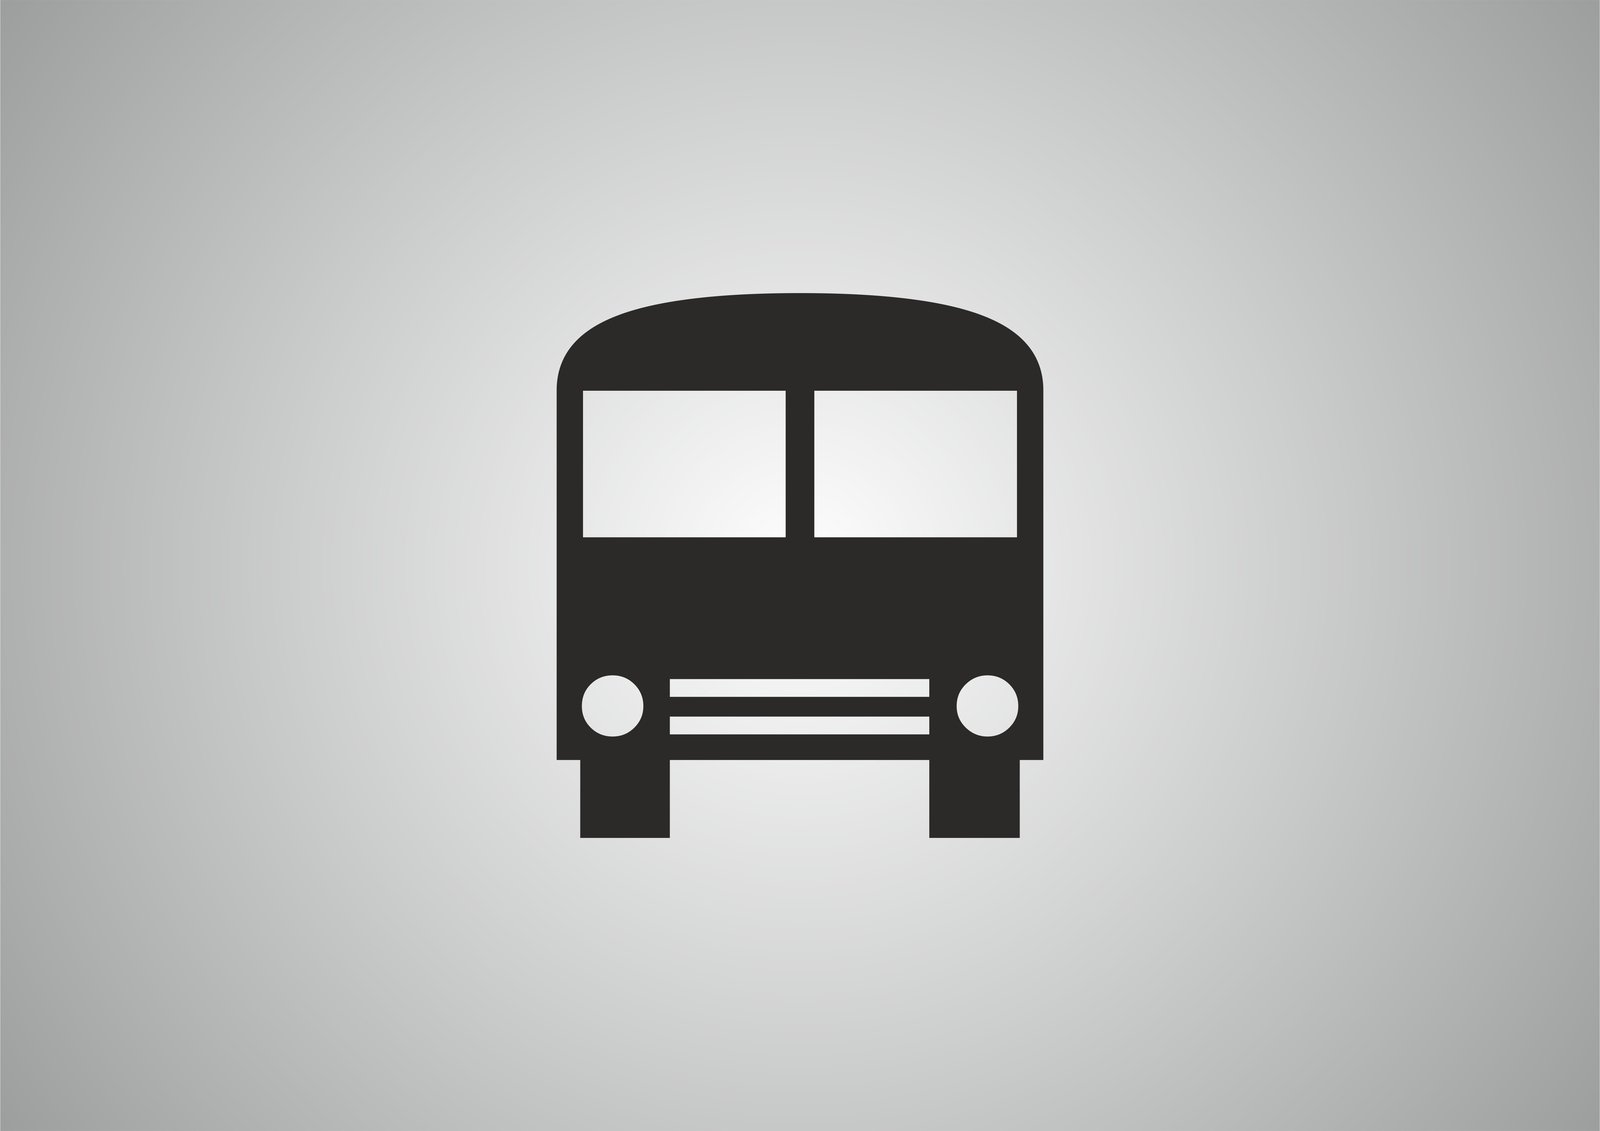 a bus icon in flat design style